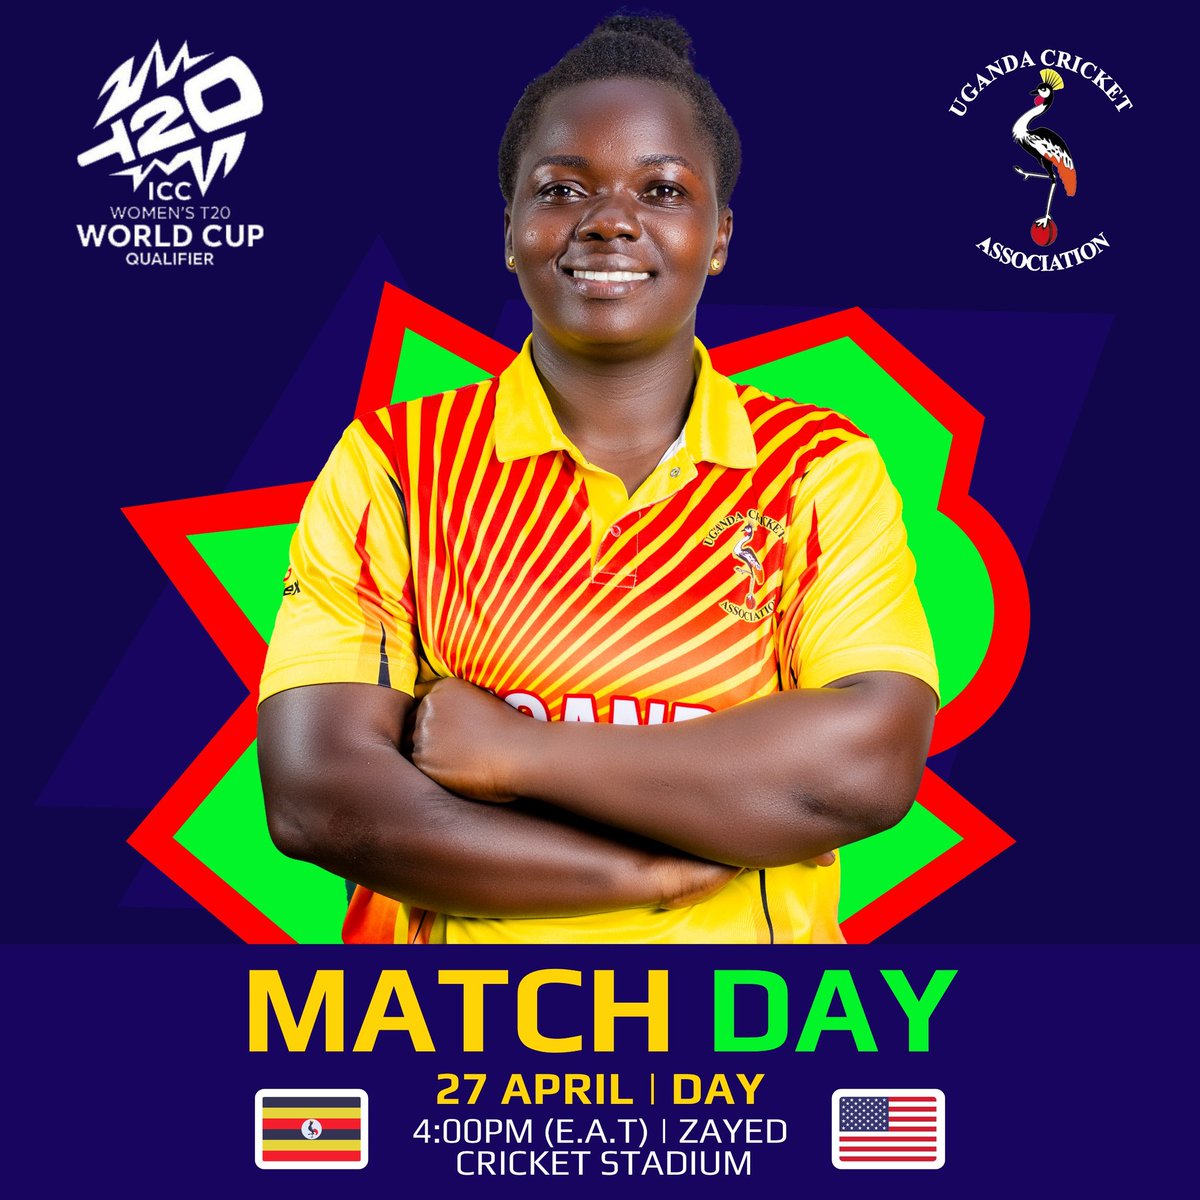 Match Day: ICC T20 Women's Global Qualifiers

Game 2: Uganda W 🇺🇬 vs. USA W 🇺🇸

The Victoria Pearls strive for a comeback in the World Cup qualifiers against the USA 🇺🇸

All fans are behind you, girls! 🇺🇬 🇺🇬 🇺🇬 🇺🇬🇺🇬 

To watch games icc.tv

 #LetsGoVictoriaPearls